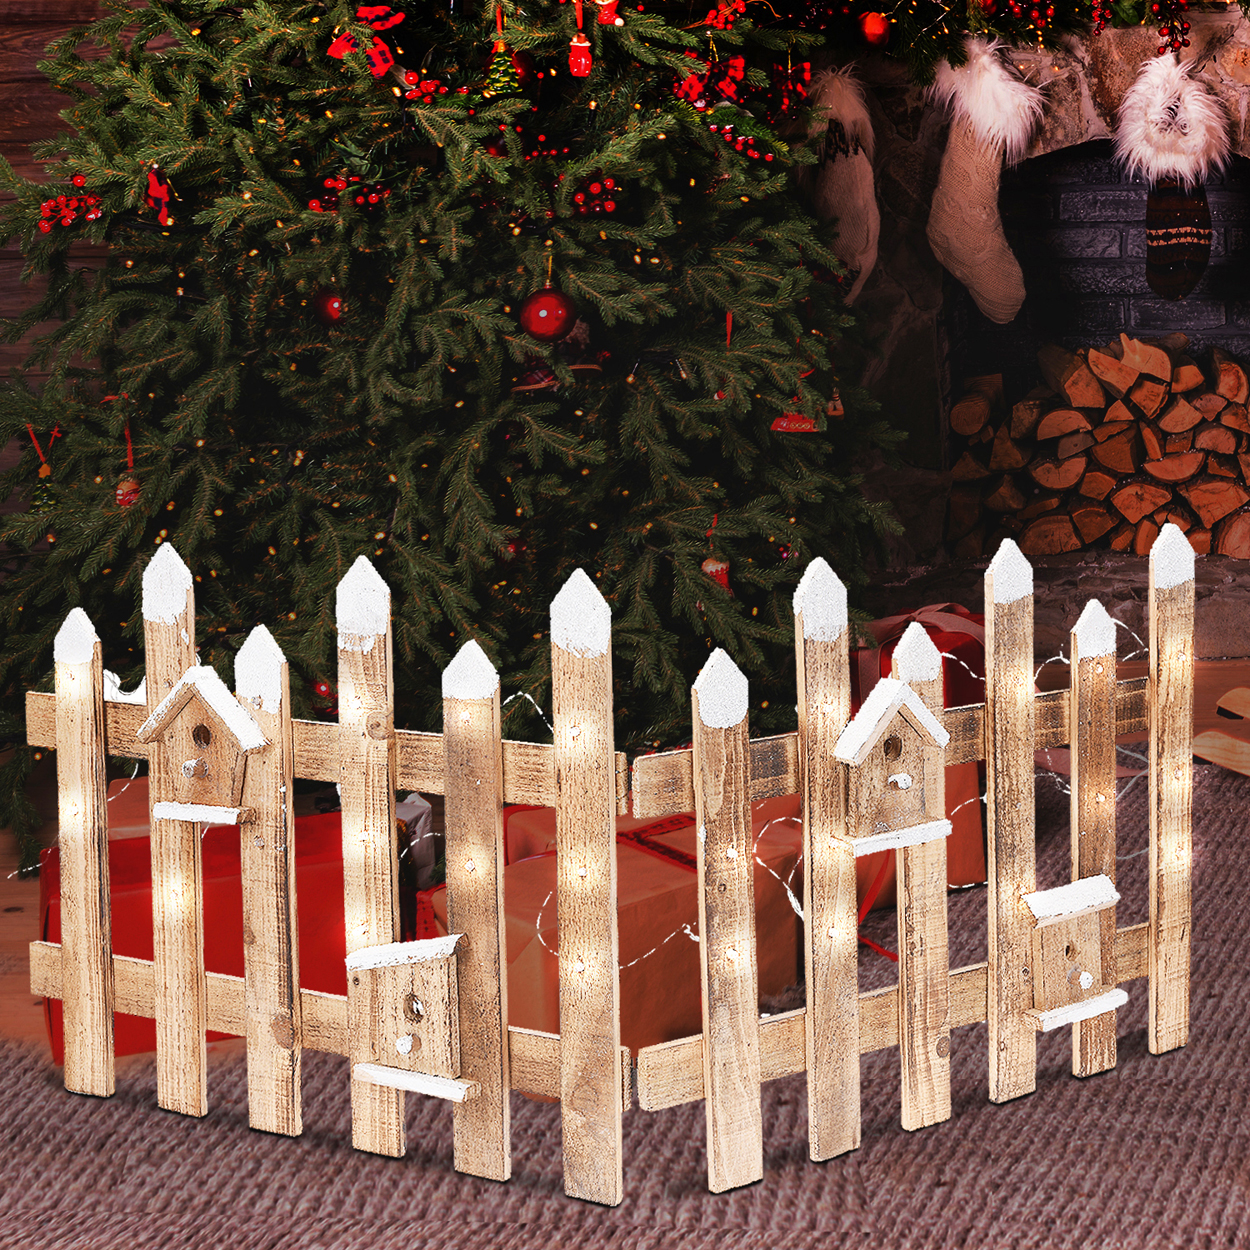 Rustic Wooden Snow Fence 30 LED Lights Christmas Xmas Tree Skirt Stand Cover NEW